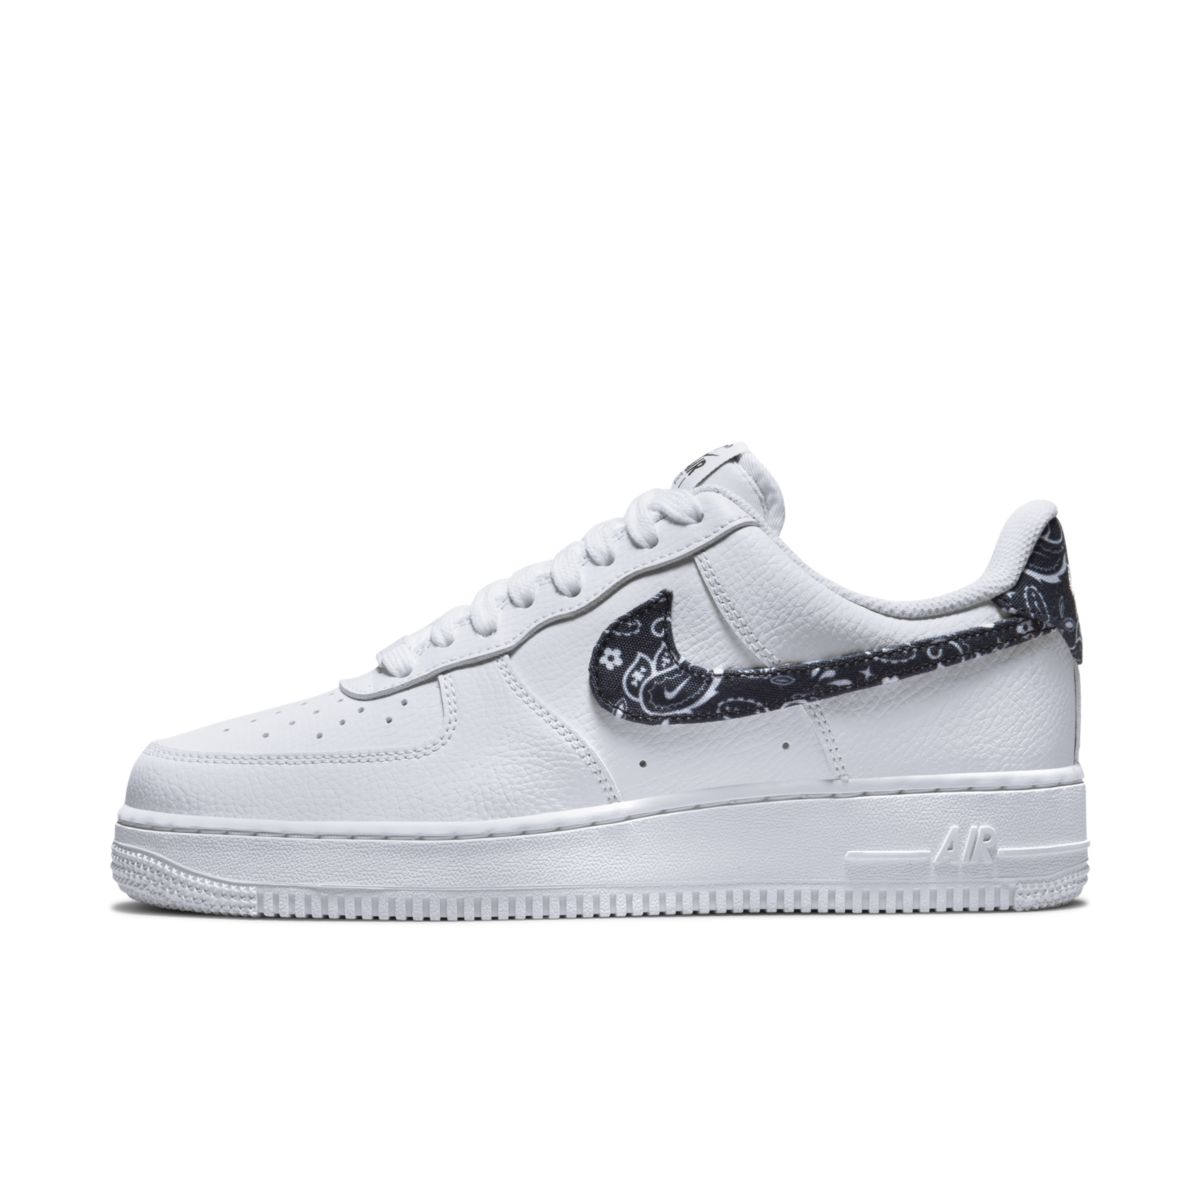 Nike Air Force 1 low black paisley DH4406-101 2